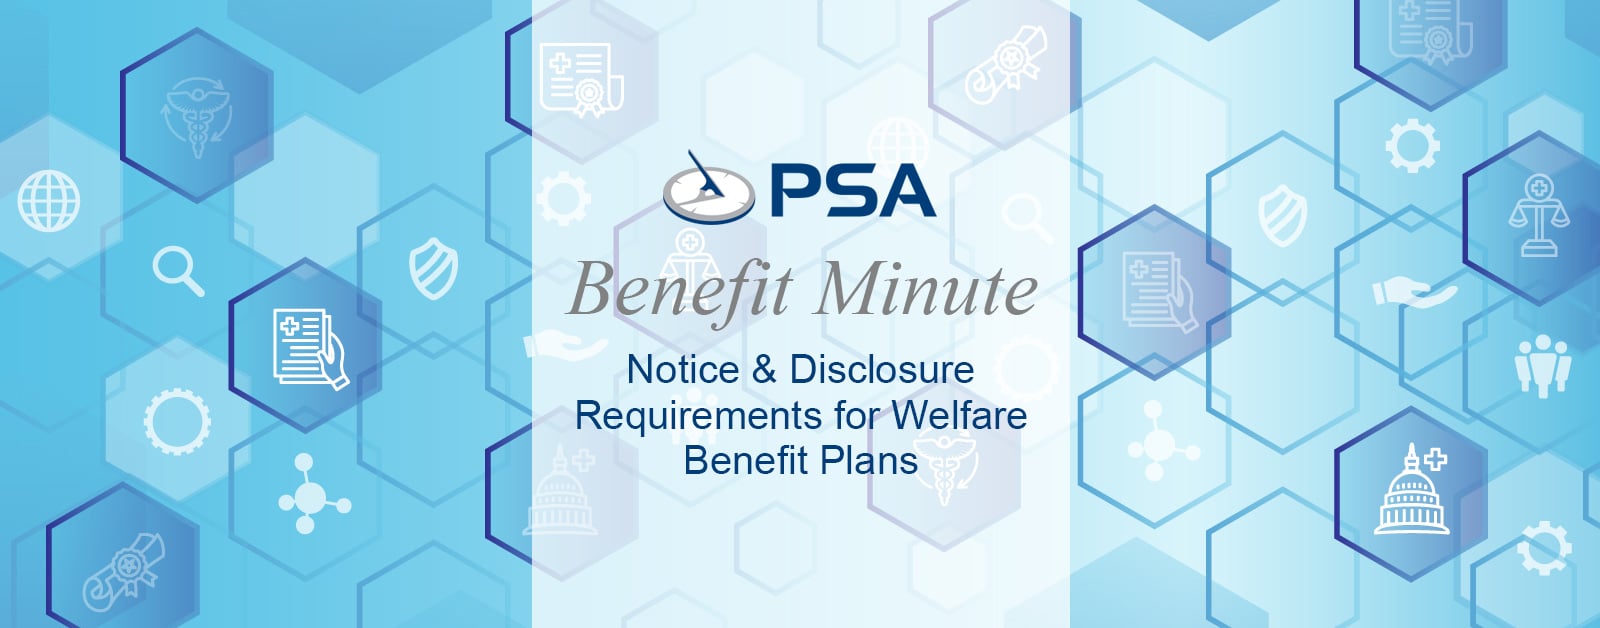 Image reading "Benefit Minute" on PSA Financial's website